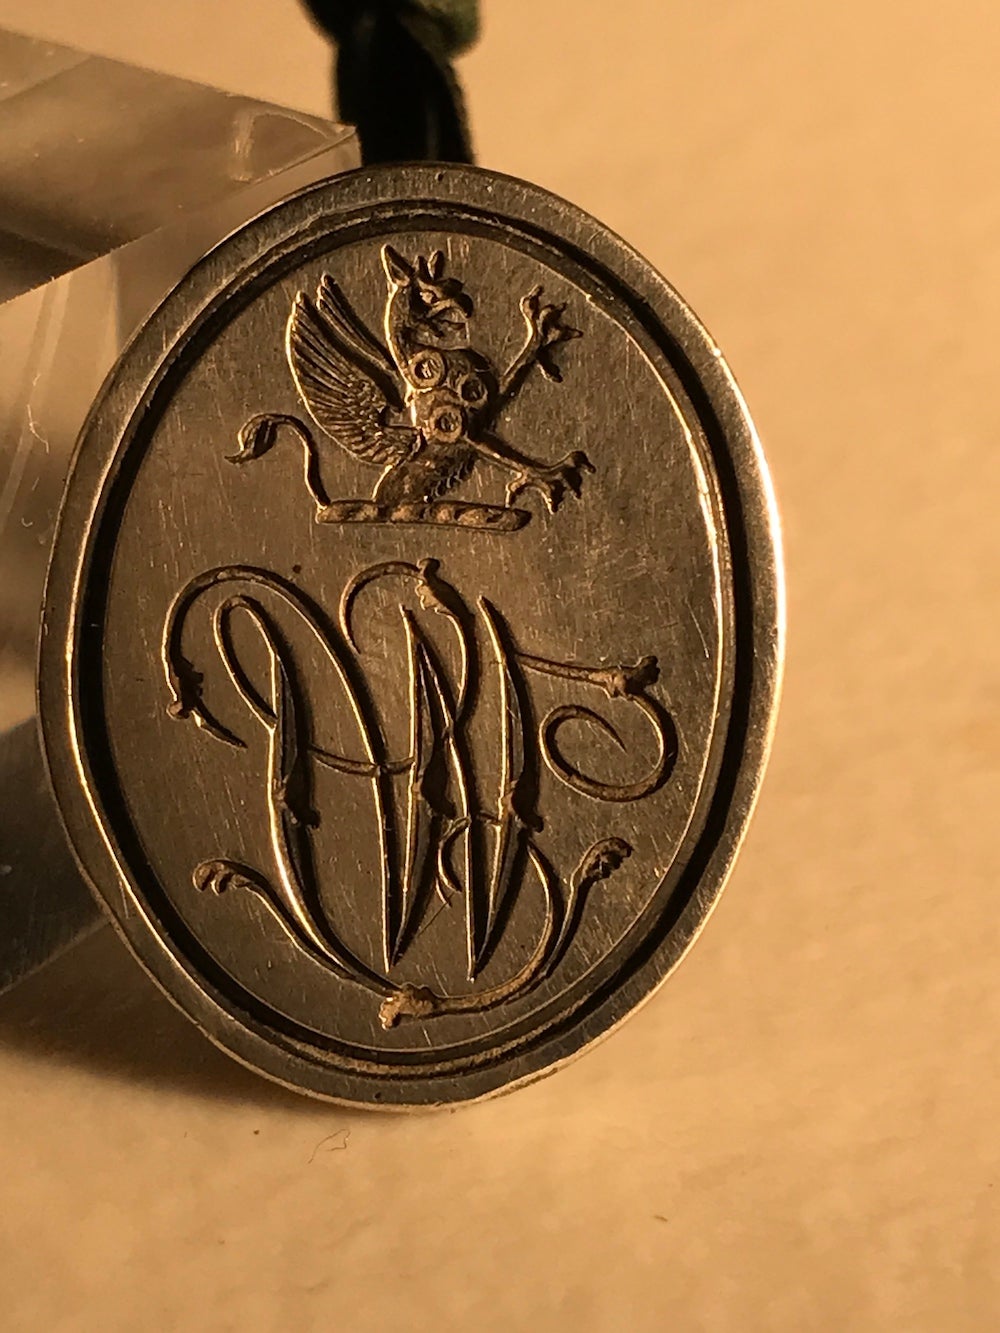 Chased with a wivern rampant above the initials ‘WJ’. Stamped 'IS' makers mark, the duty mark of 1795 with the King's profile and a lion passant (guardant) mark of London and other English Assay Offices. 
Measures: length 2.5cm height 2.5cm depth